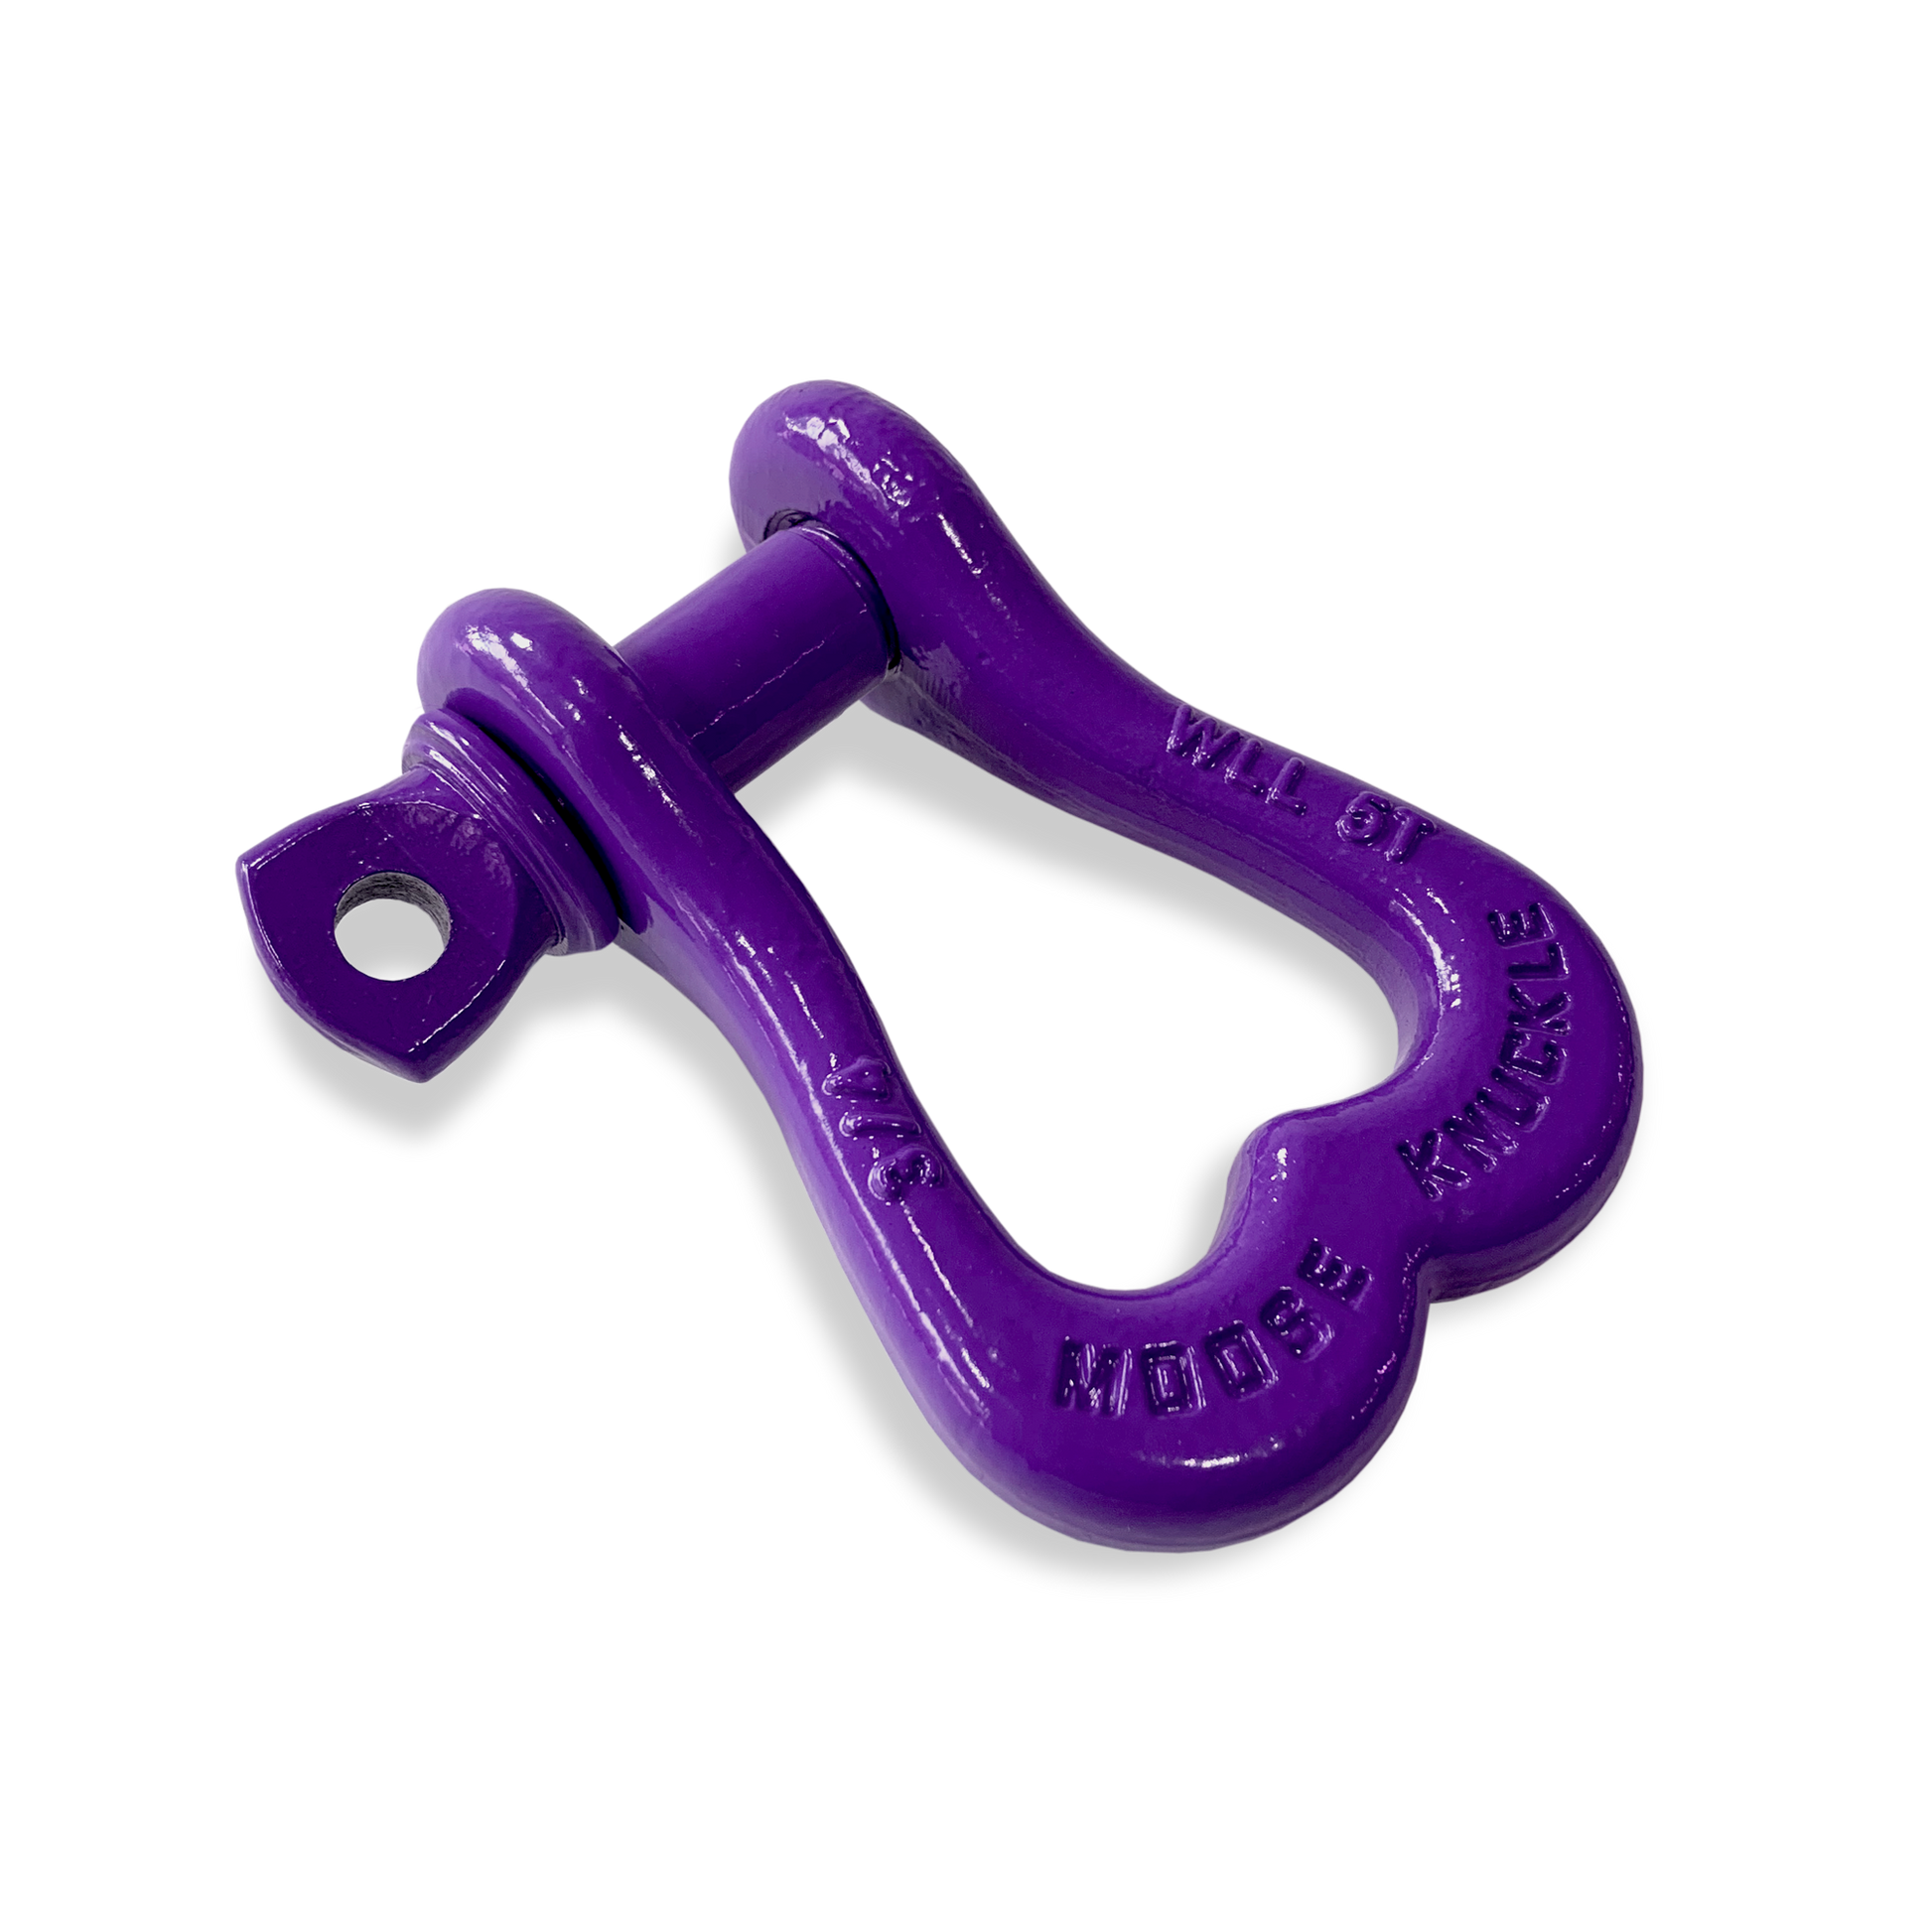 Moose Knuckle XL Grape Escape Purple Bow D-Ring 3/4" Shackle for Off-Road Closed Loop 4x4 and SxS Vehicle Recovery